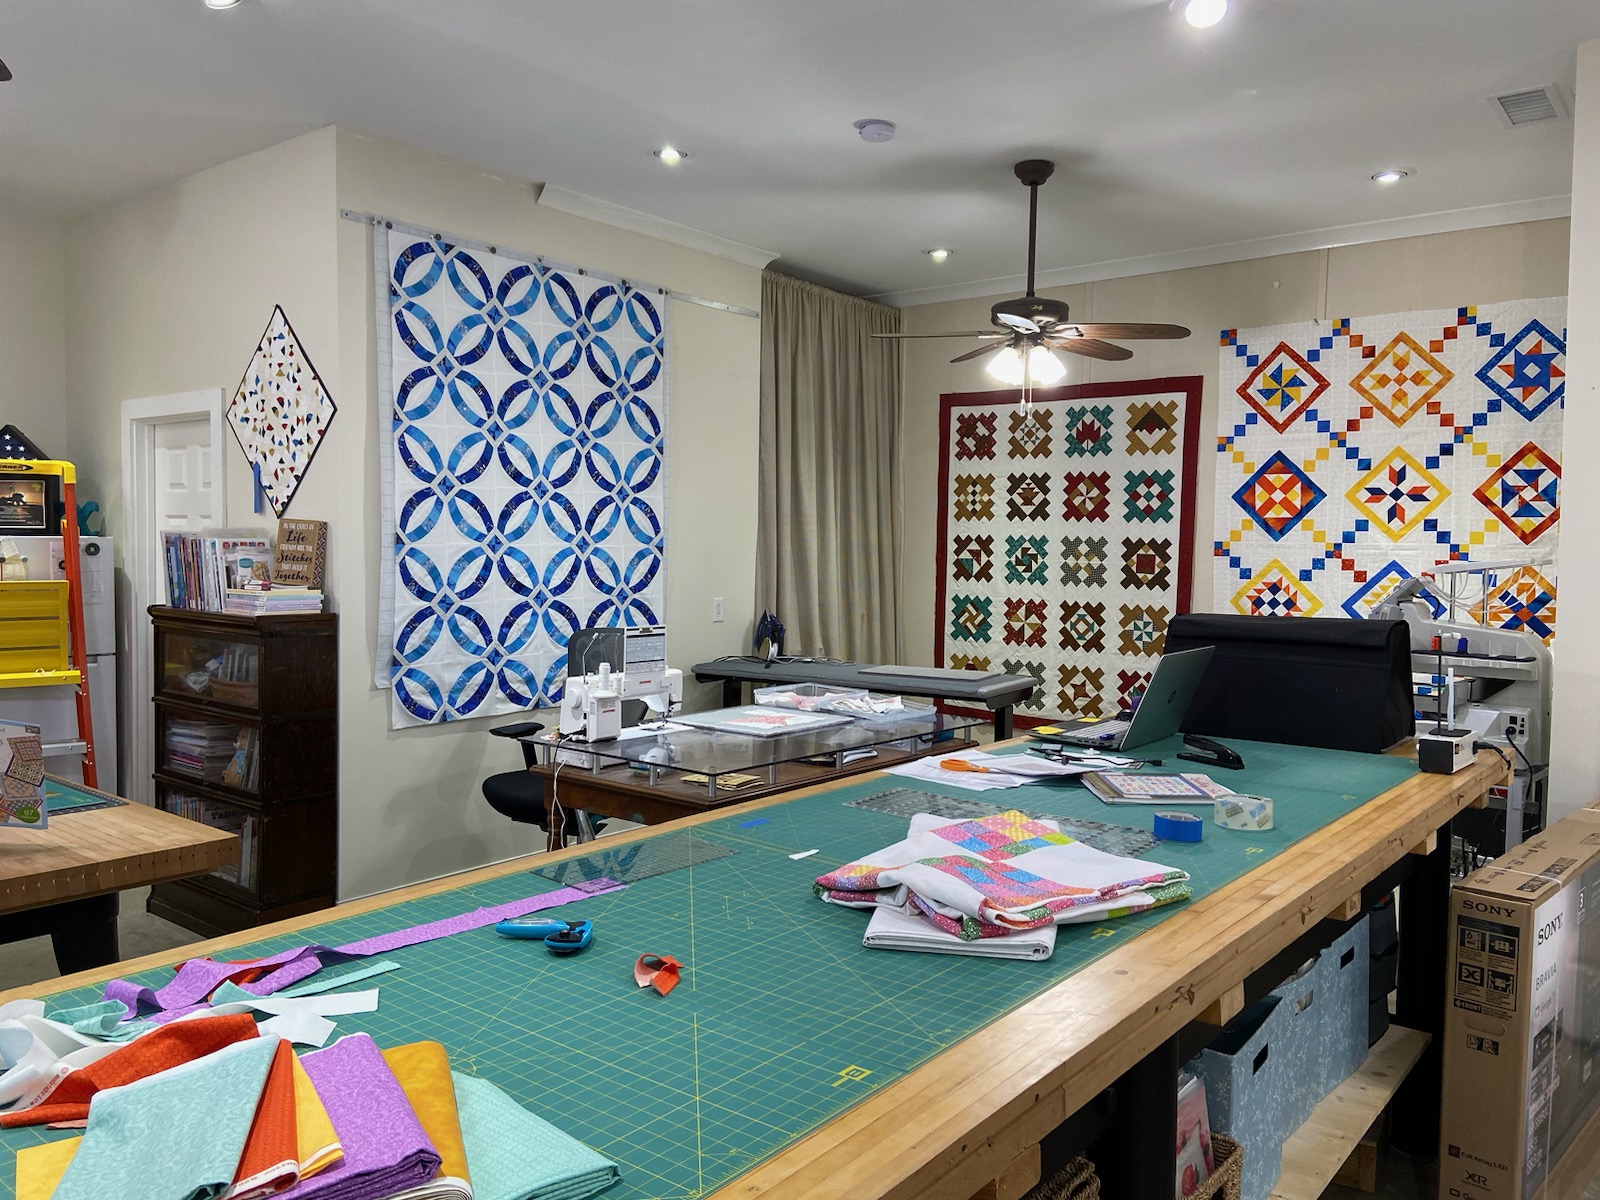 Longarm Quilting Services